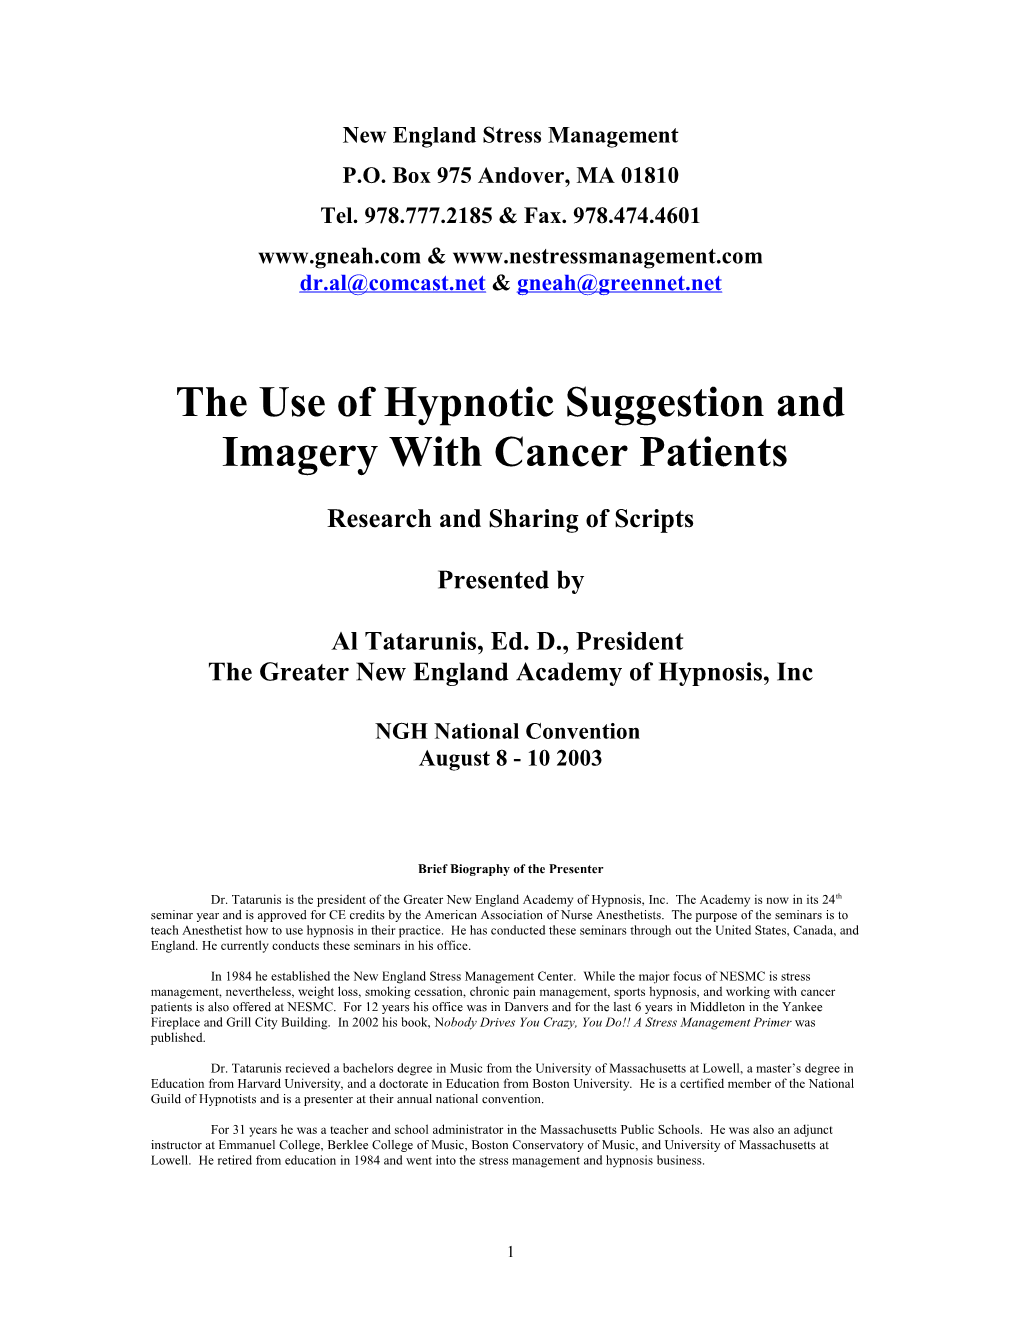 Controlling Cancer with Hypnosis